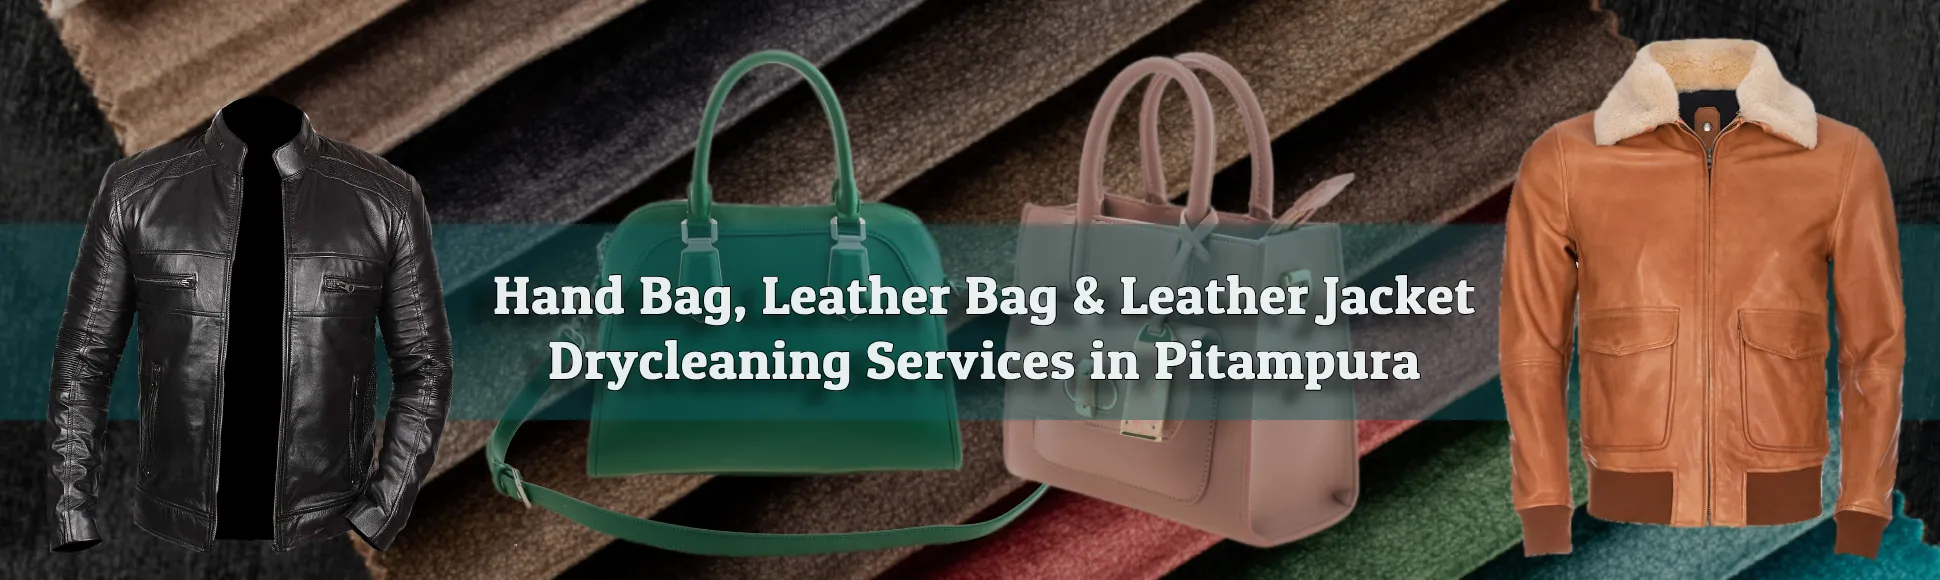 How to clean leather bags at home | Guide to leather cleaning